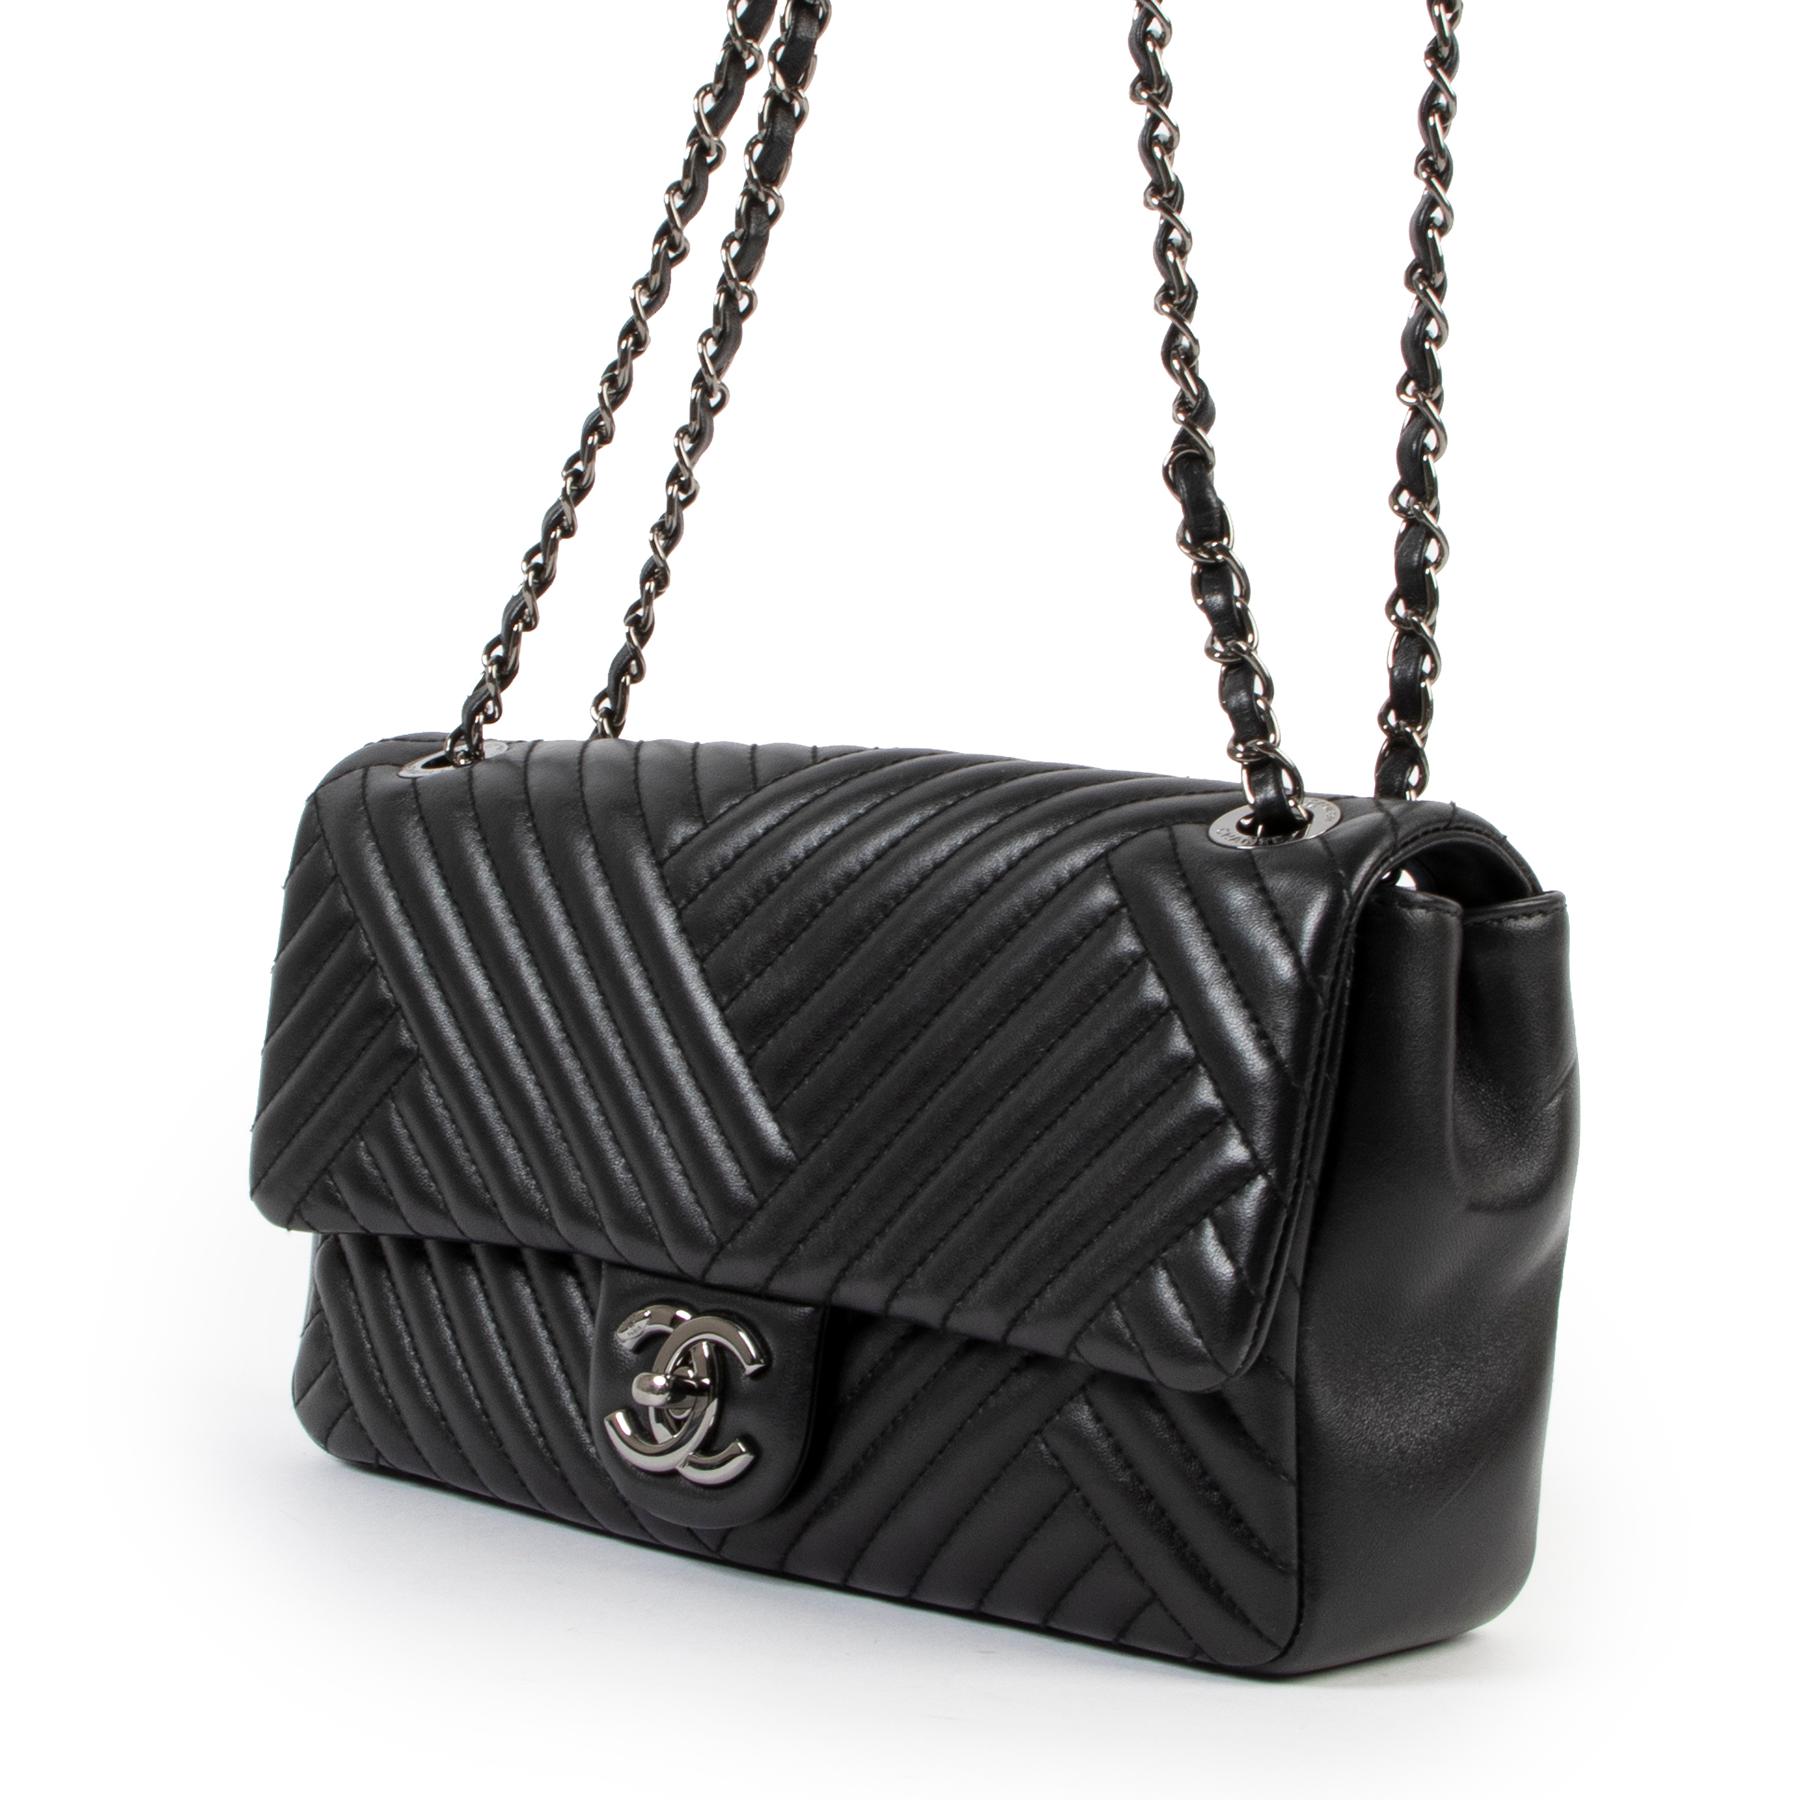 Chanel Black Timeless Chevron Flap Bag 

A Chanel Flap Bag is always a good idea! 

This Black Chanel Flap Bag is crafted from soft leather, featured by a silver-toned CC lock and the classic Chanel chain leather. On the inside you will find one